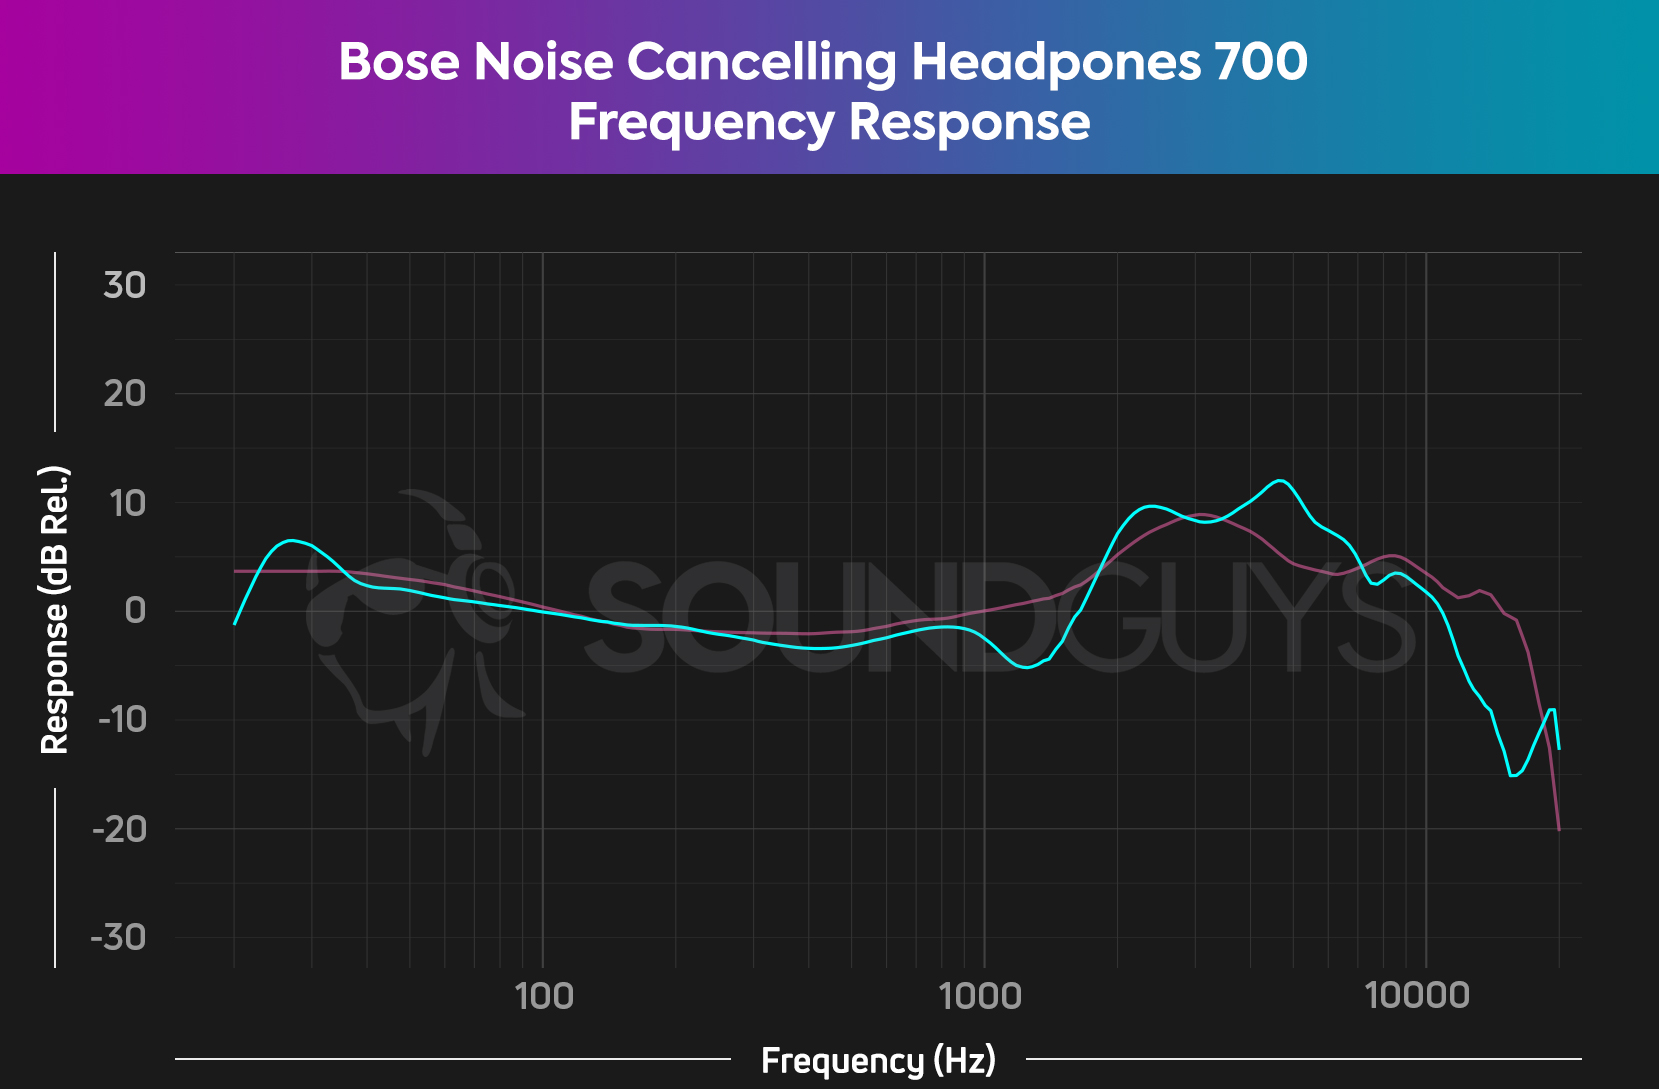 The frequency response chart for the Bose Noise Canceling Headphones 700 which follows our house curve, though some bass emphasis is apparent.